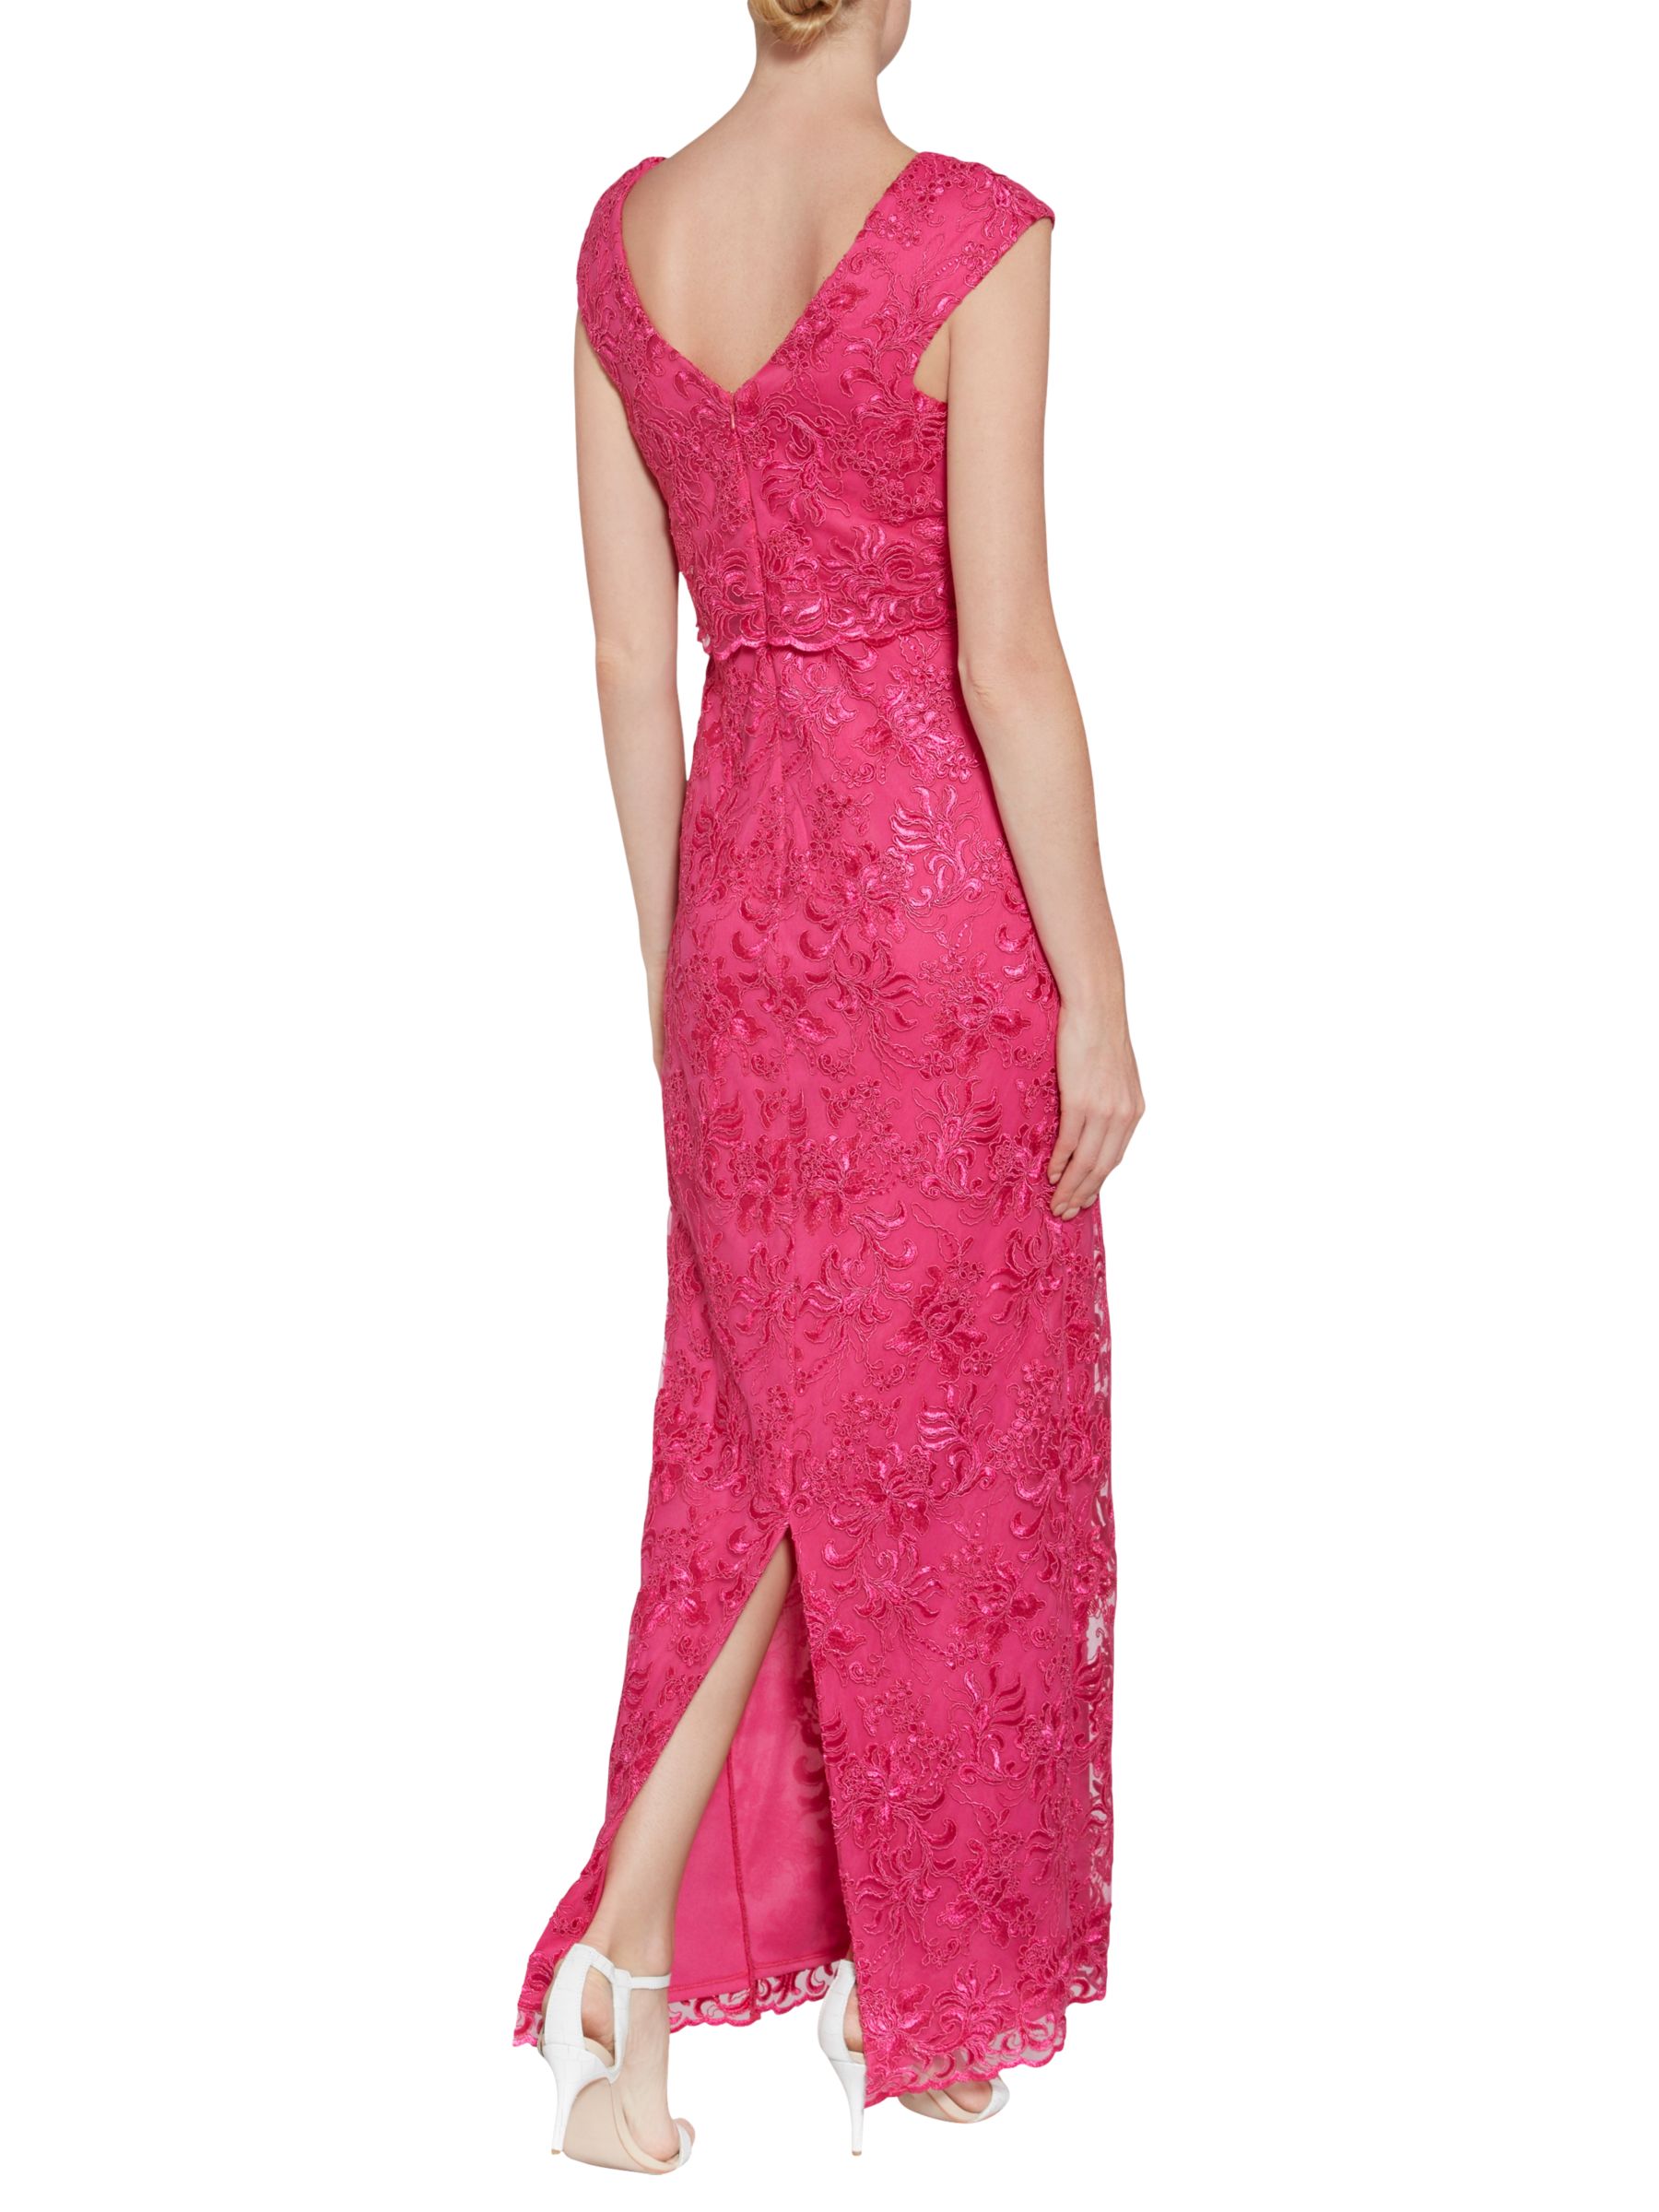 Gina Bacconi Embroidered Corded Mesh Maxi Dress at John Lewis & Partners